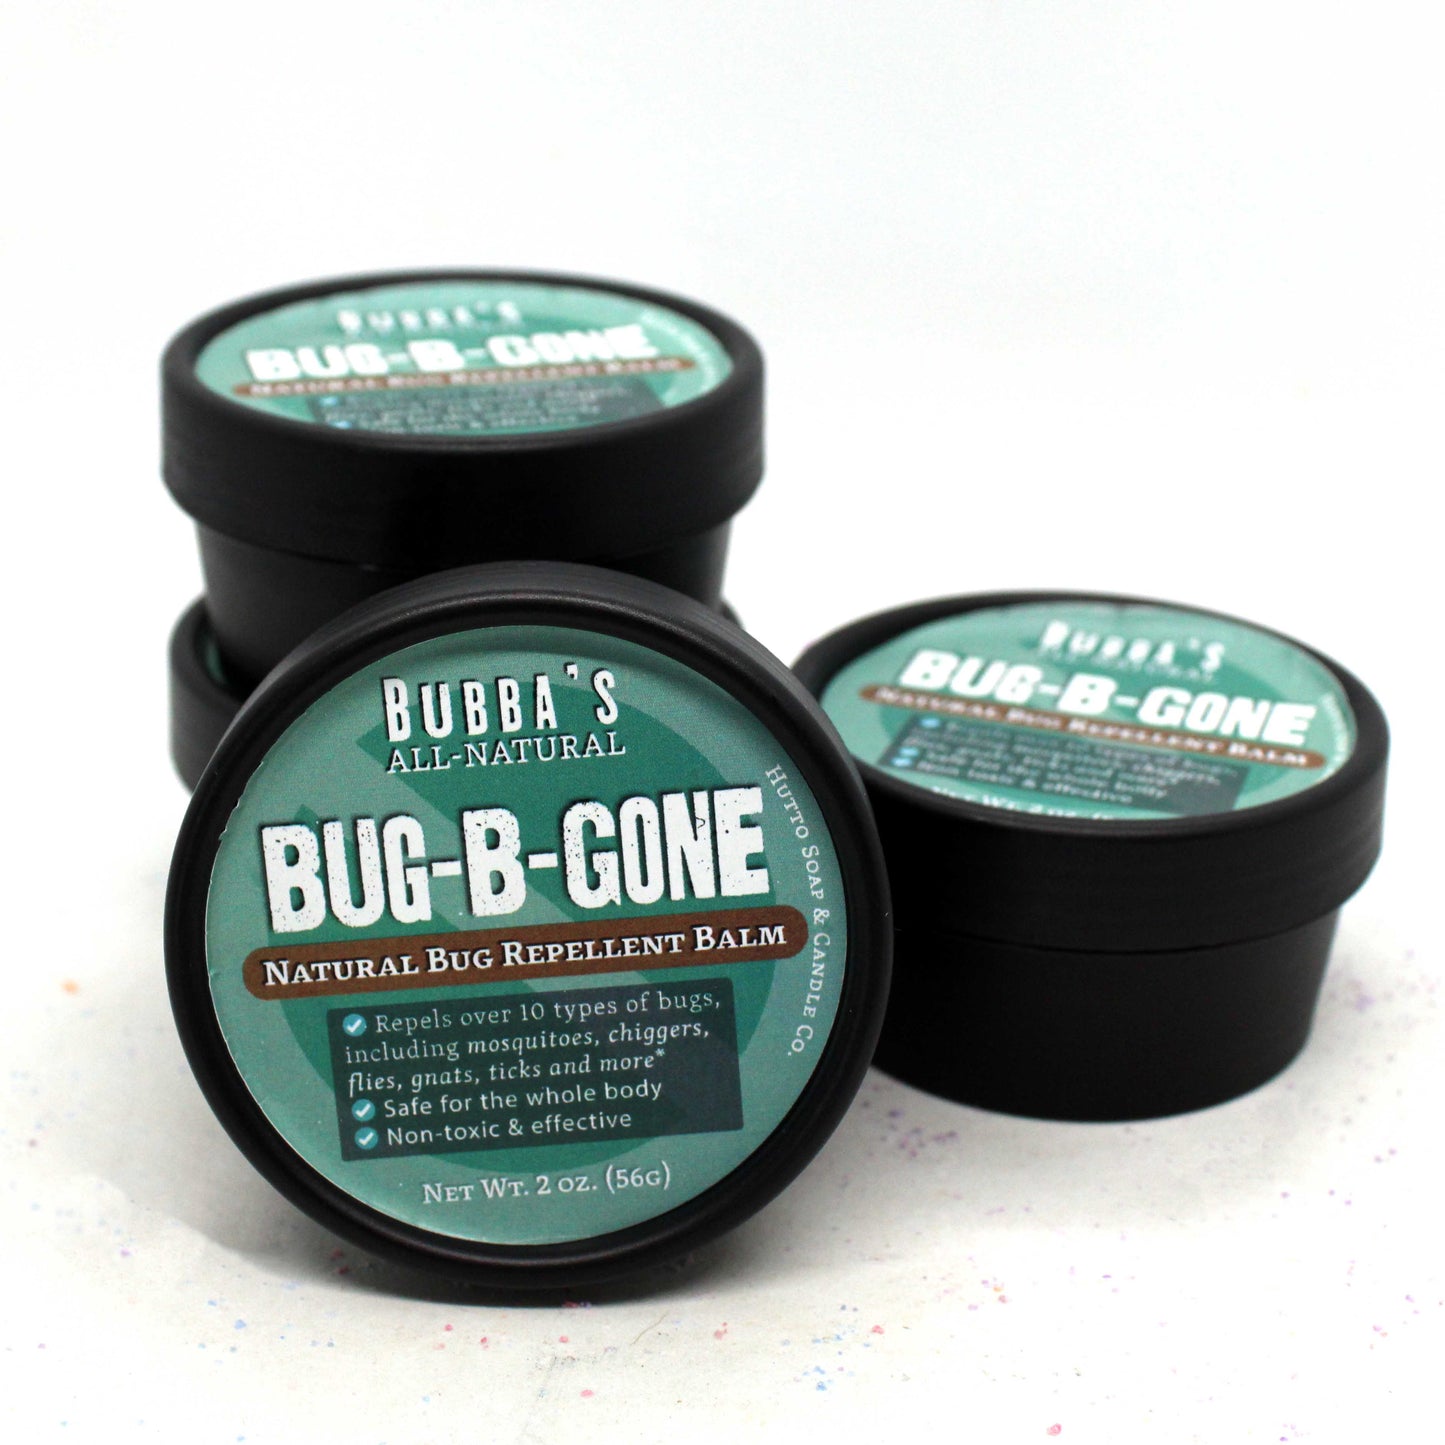 Bubba's Bug-B-Gone Natural Bug Repellent Balm